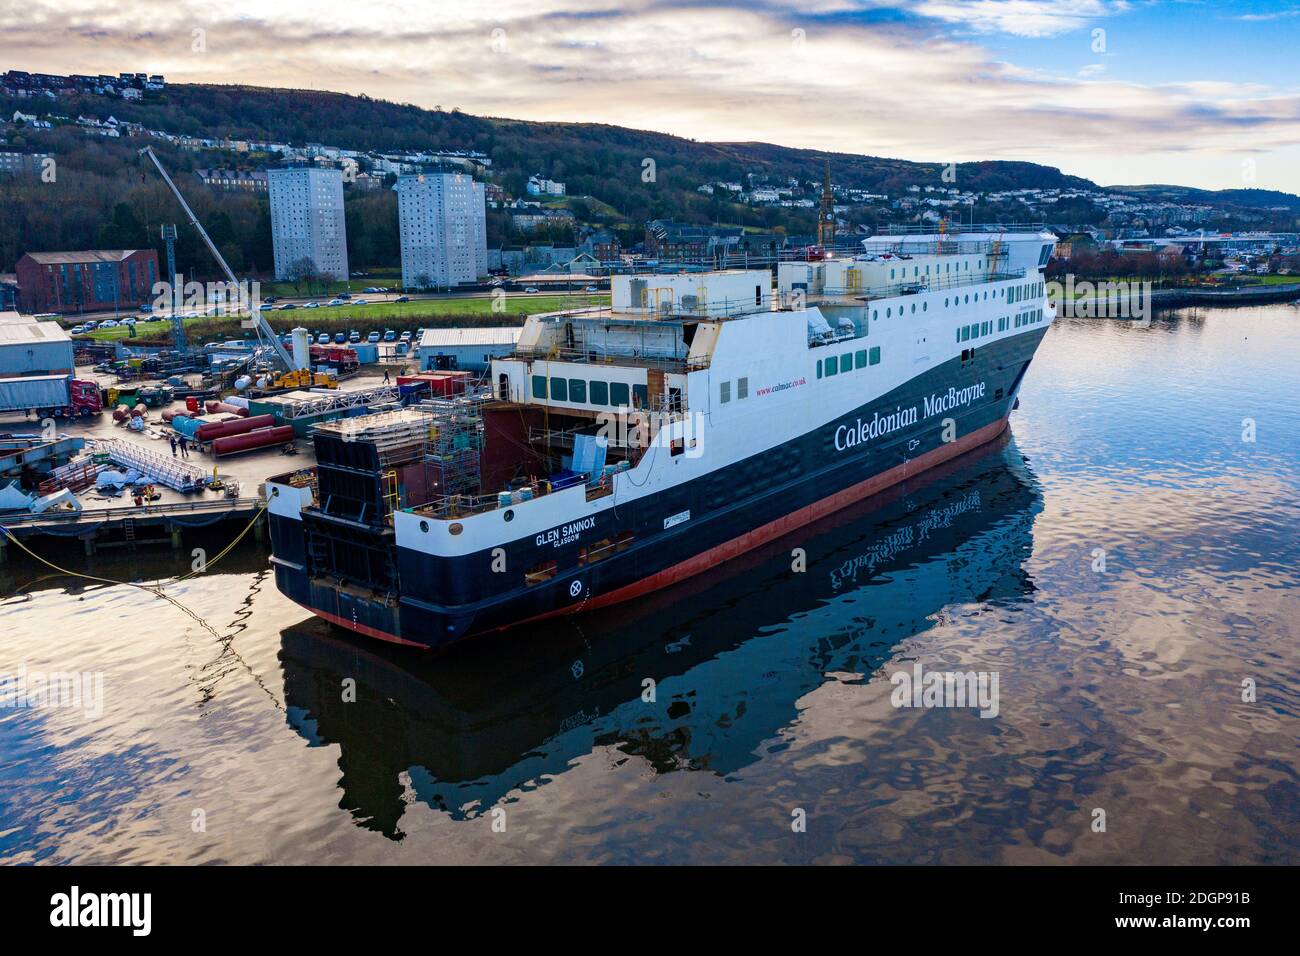 Port Glasgow, Scotland, UK. 9 December 2020. Aerial view of CalMac ferry MV Glen Sannox under fabrication at Ferguson Marine shipyard in Port Glasgow. The Scottish ParliamentÕs Rural Economy and Connectivity Committee publish damning report criticising all aspects of the over budget and overdue project. Iain Masterton/Alamy Live News Stock Photo